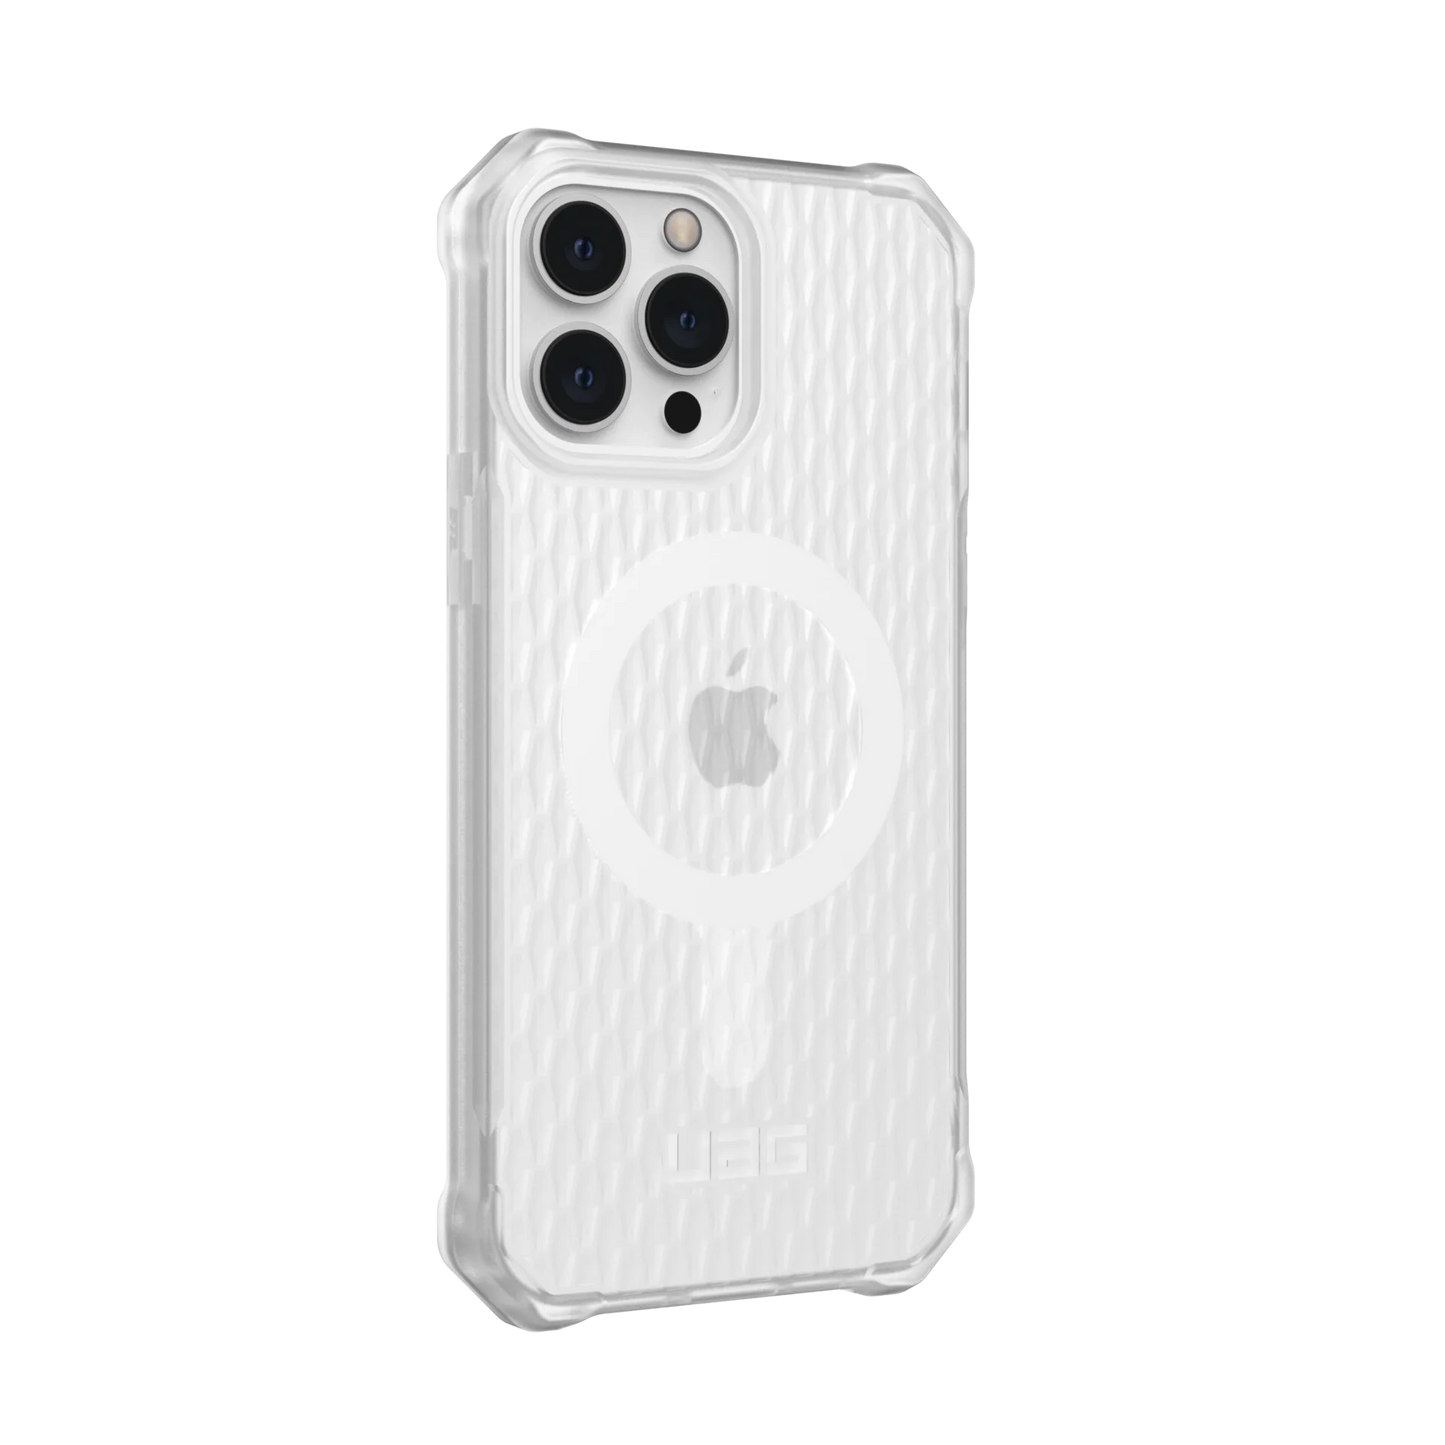 ESSENTIAL ARMOR FOR MAGSAFE IPHONE 13 PRO MAX 5G CASE